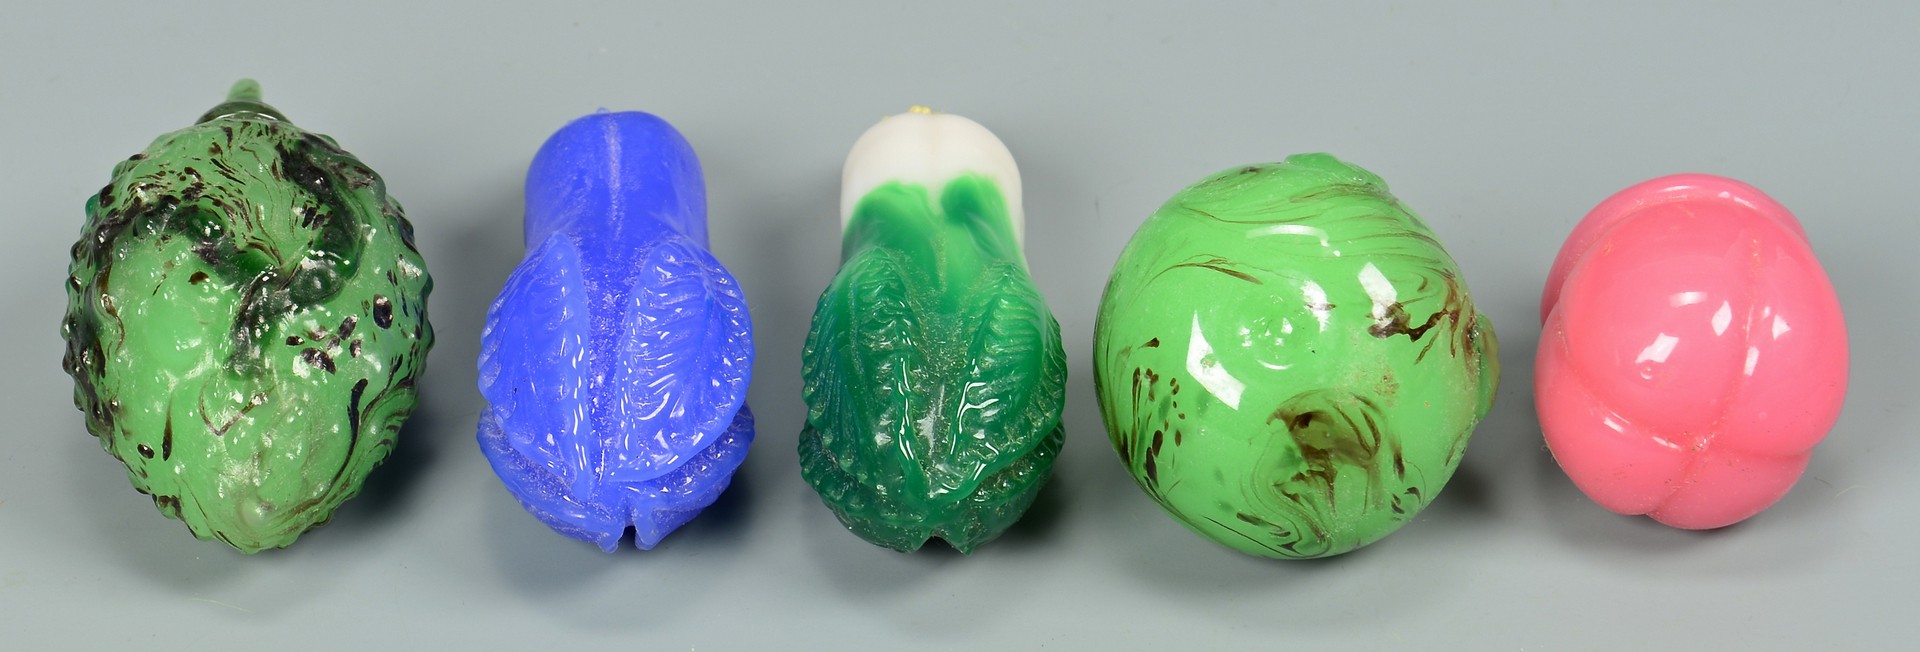 Lot 751: Peking Glass Fruit Snuff Bottles and ornaments